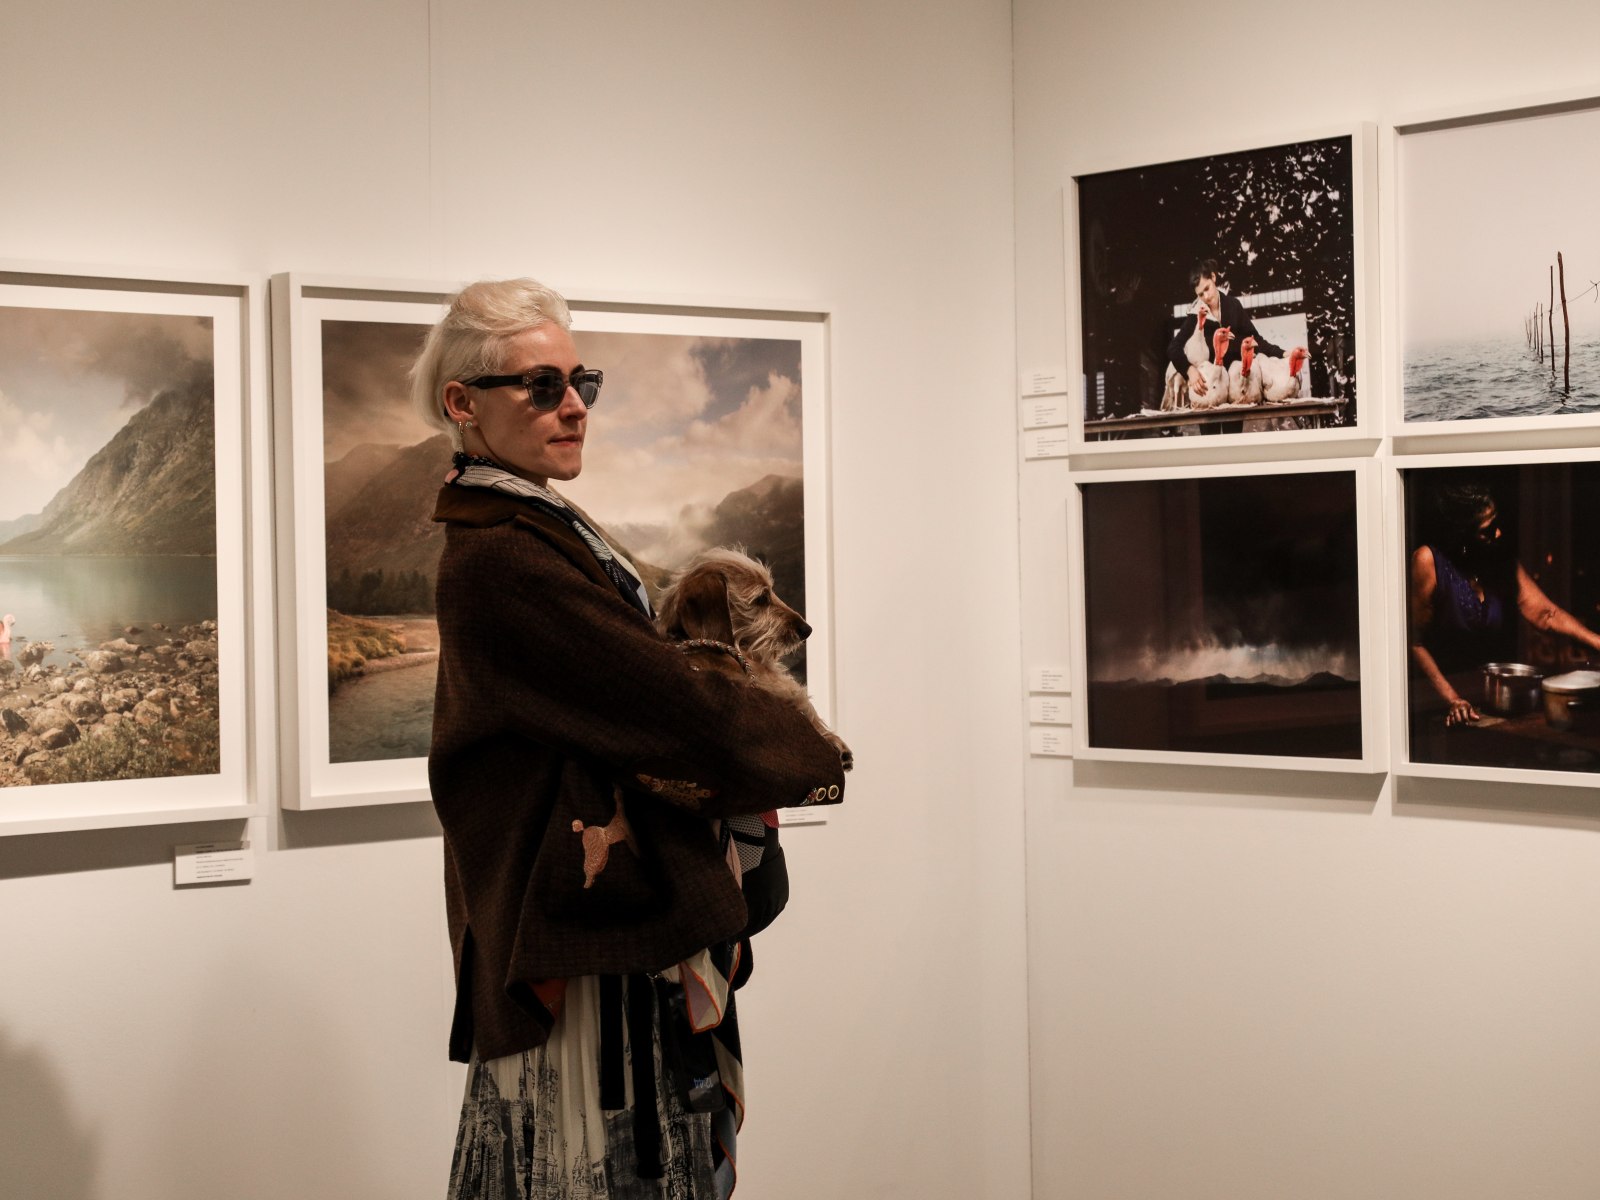 A blonde woman wears sunglasses and holds a dog while standing in a fair booth surrounded by color photographs.